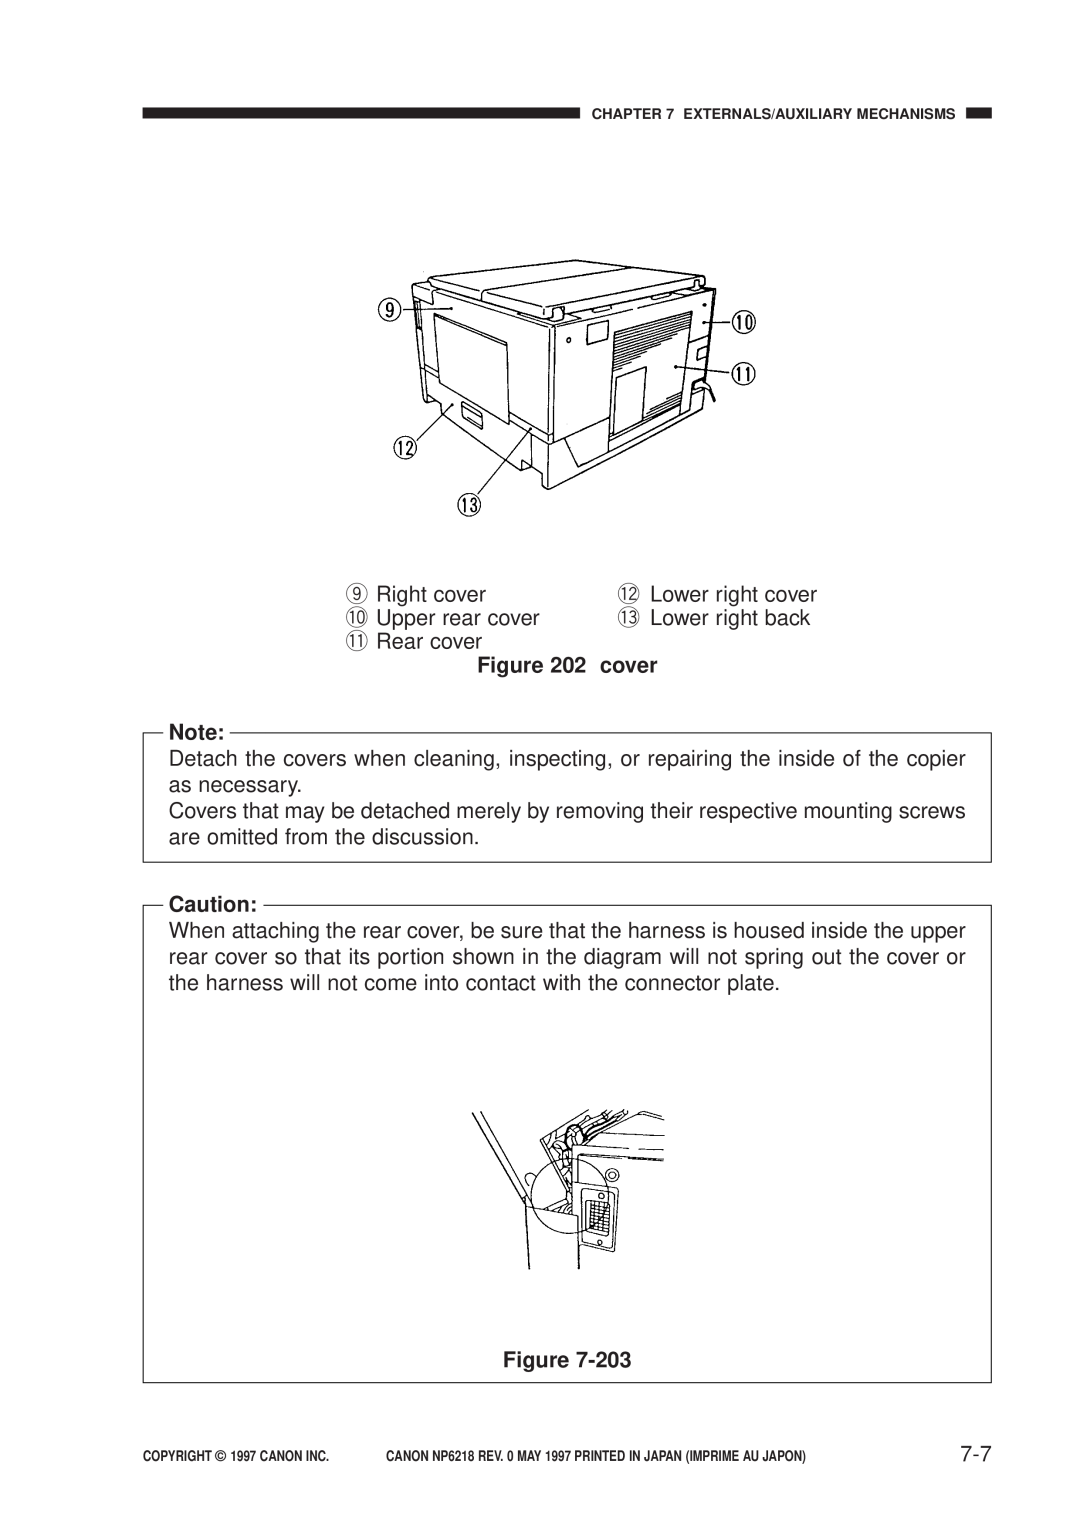 Canon NP6218, FY8-13EX-000 service manual cover 